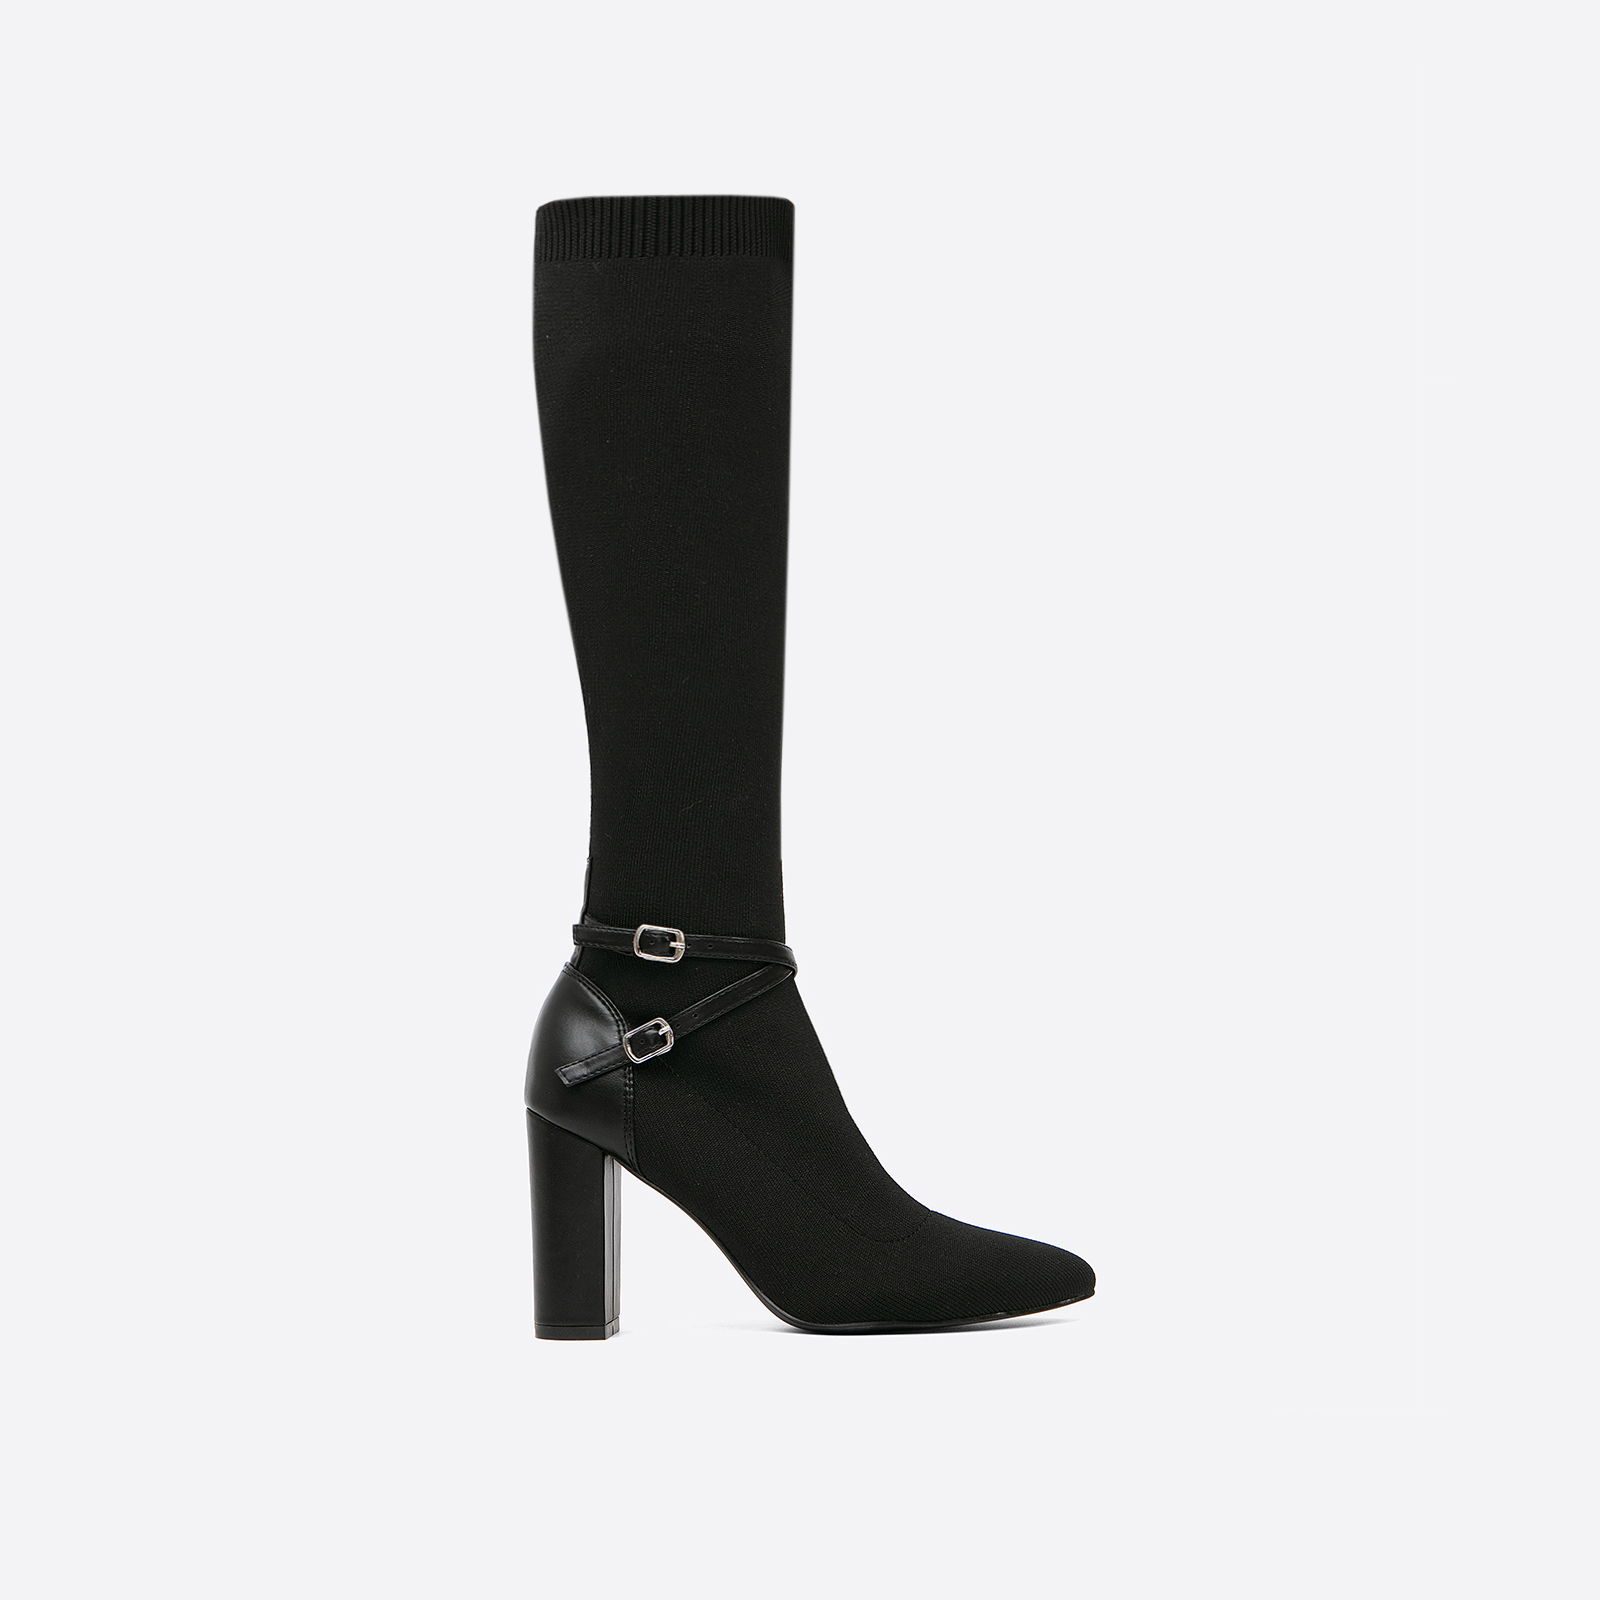 Mousse Fit Women Strap Decor Heeled High Boots